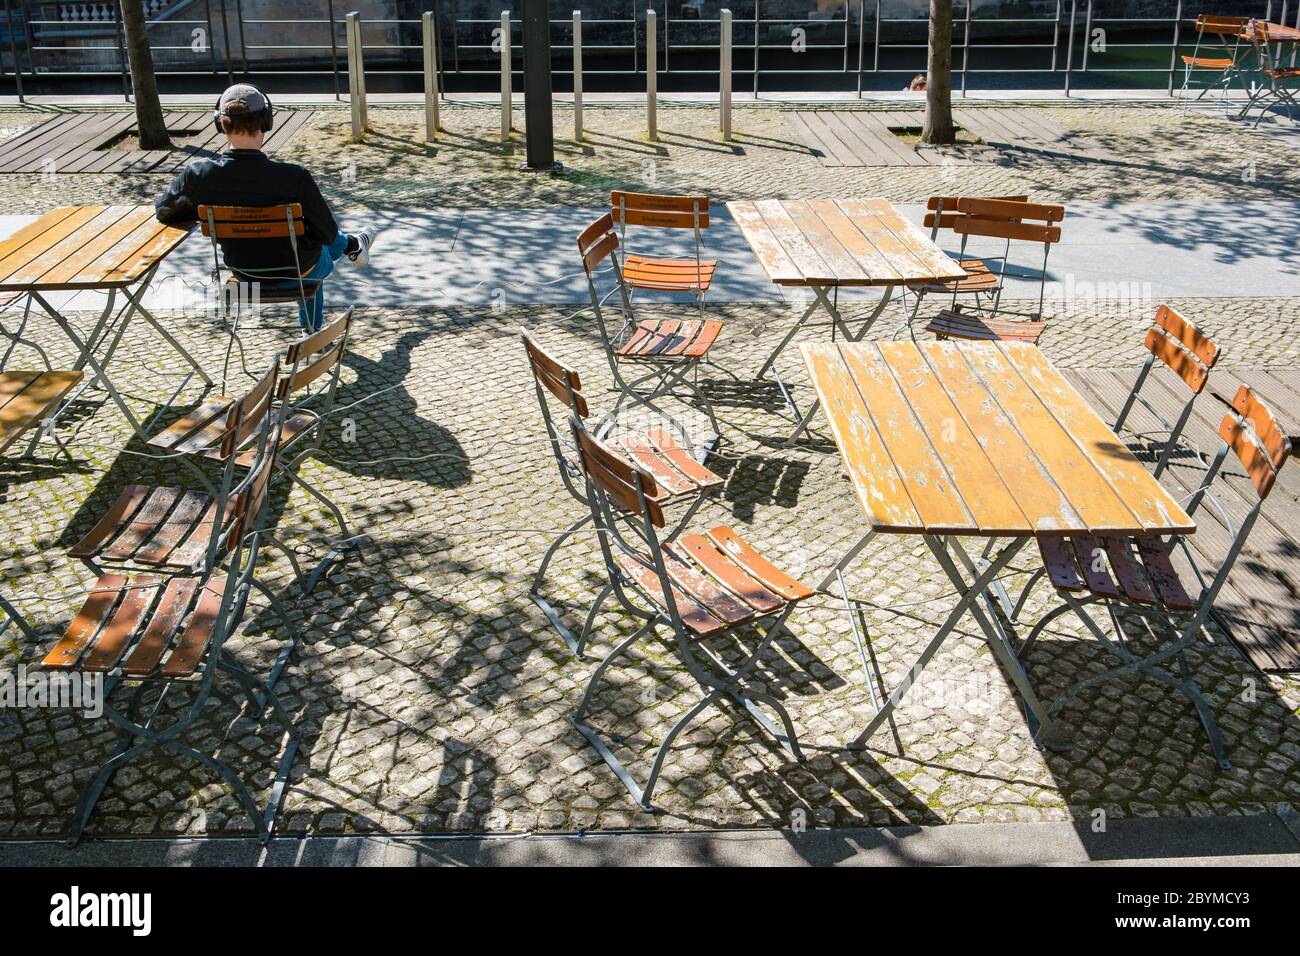 19.04.2020, Berlin, Berlin, Germany - The vacant seats in a closed restaurant opposite the Berlin Cathedral will not be occupied during springlike tem Stock Photo